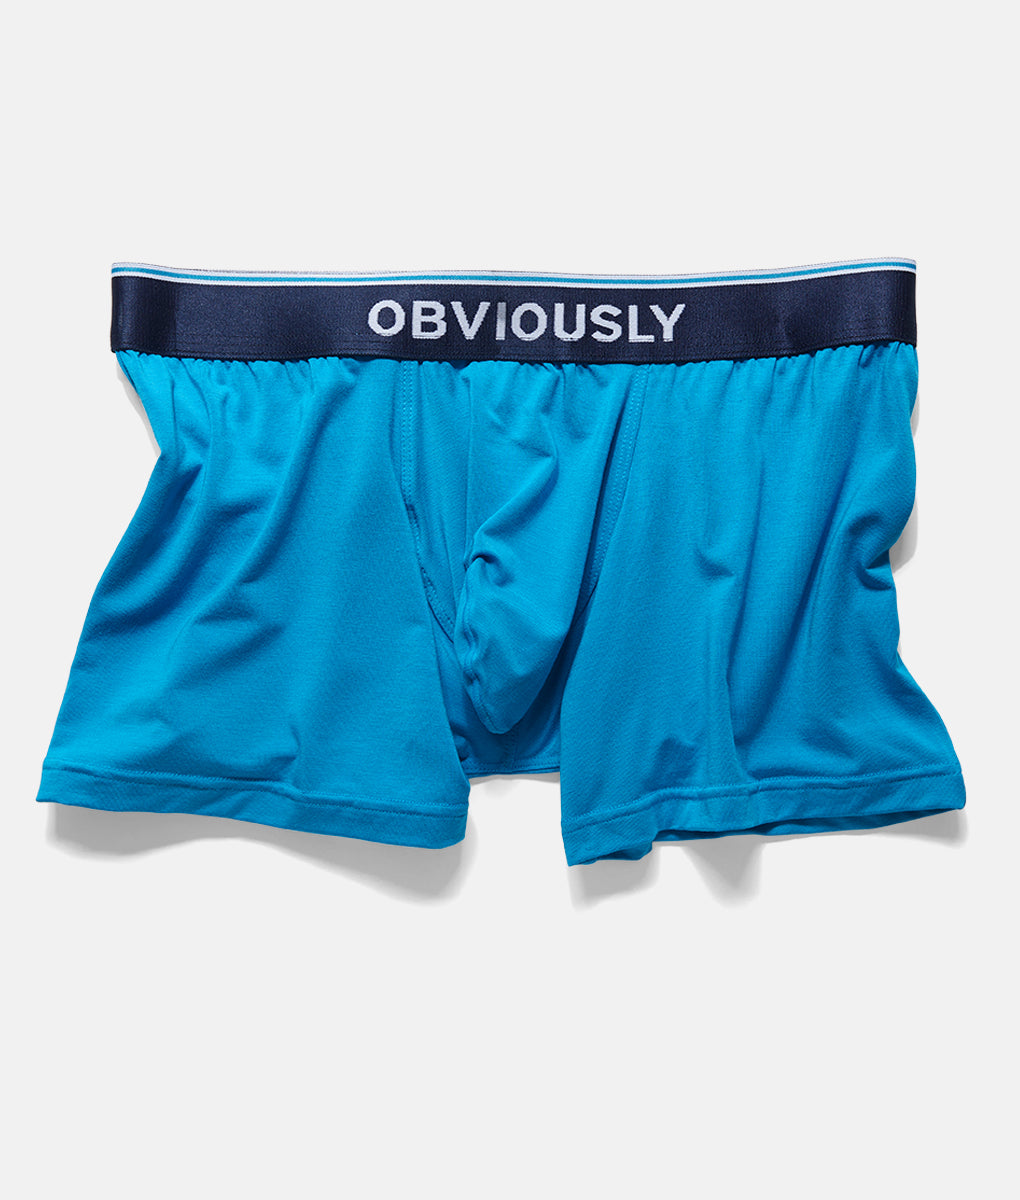 Obviously Underwear - Comfortable Aussie Briefs and Boxers from